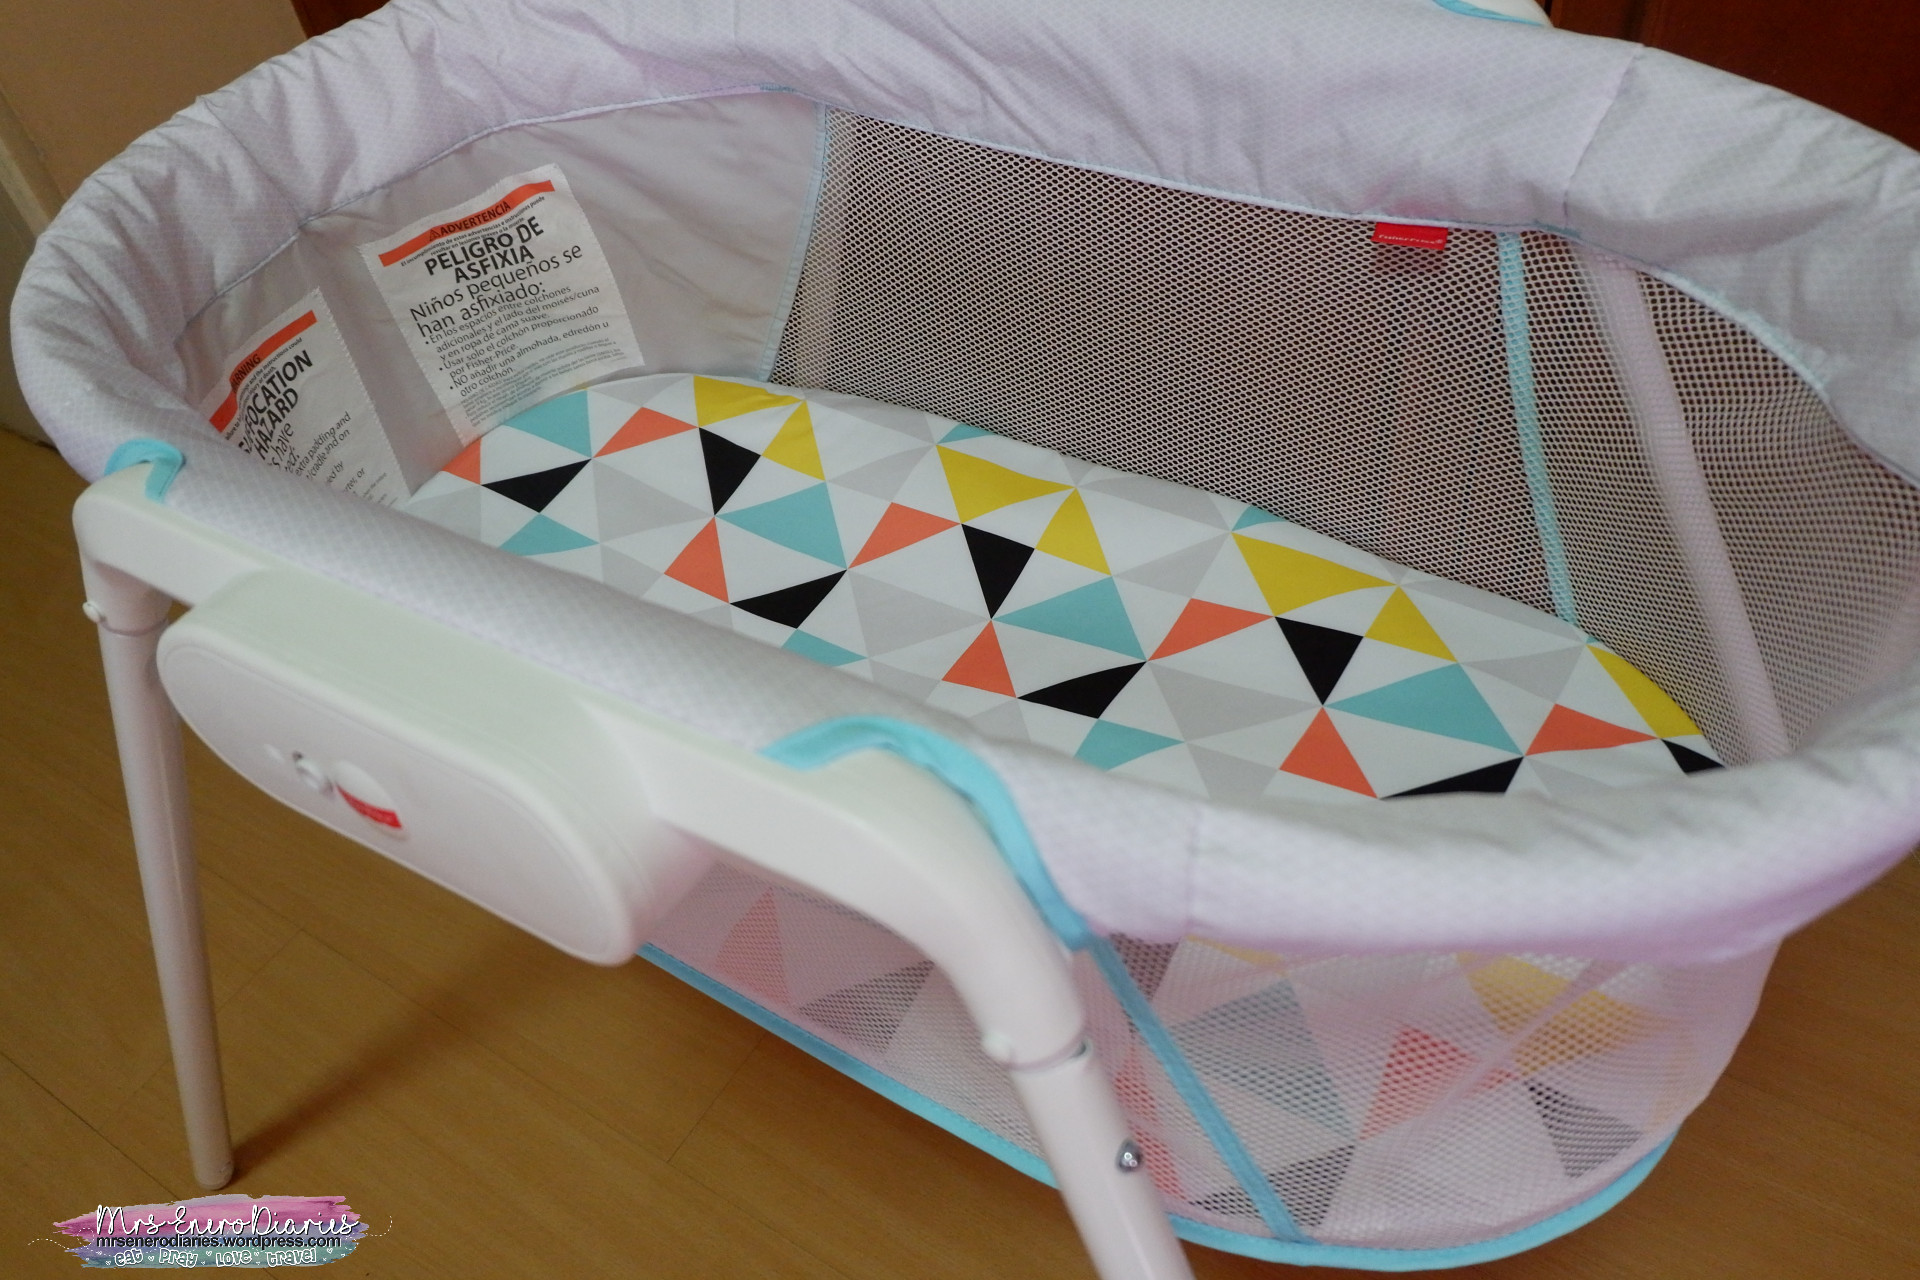 fisher price stow n go bassinet